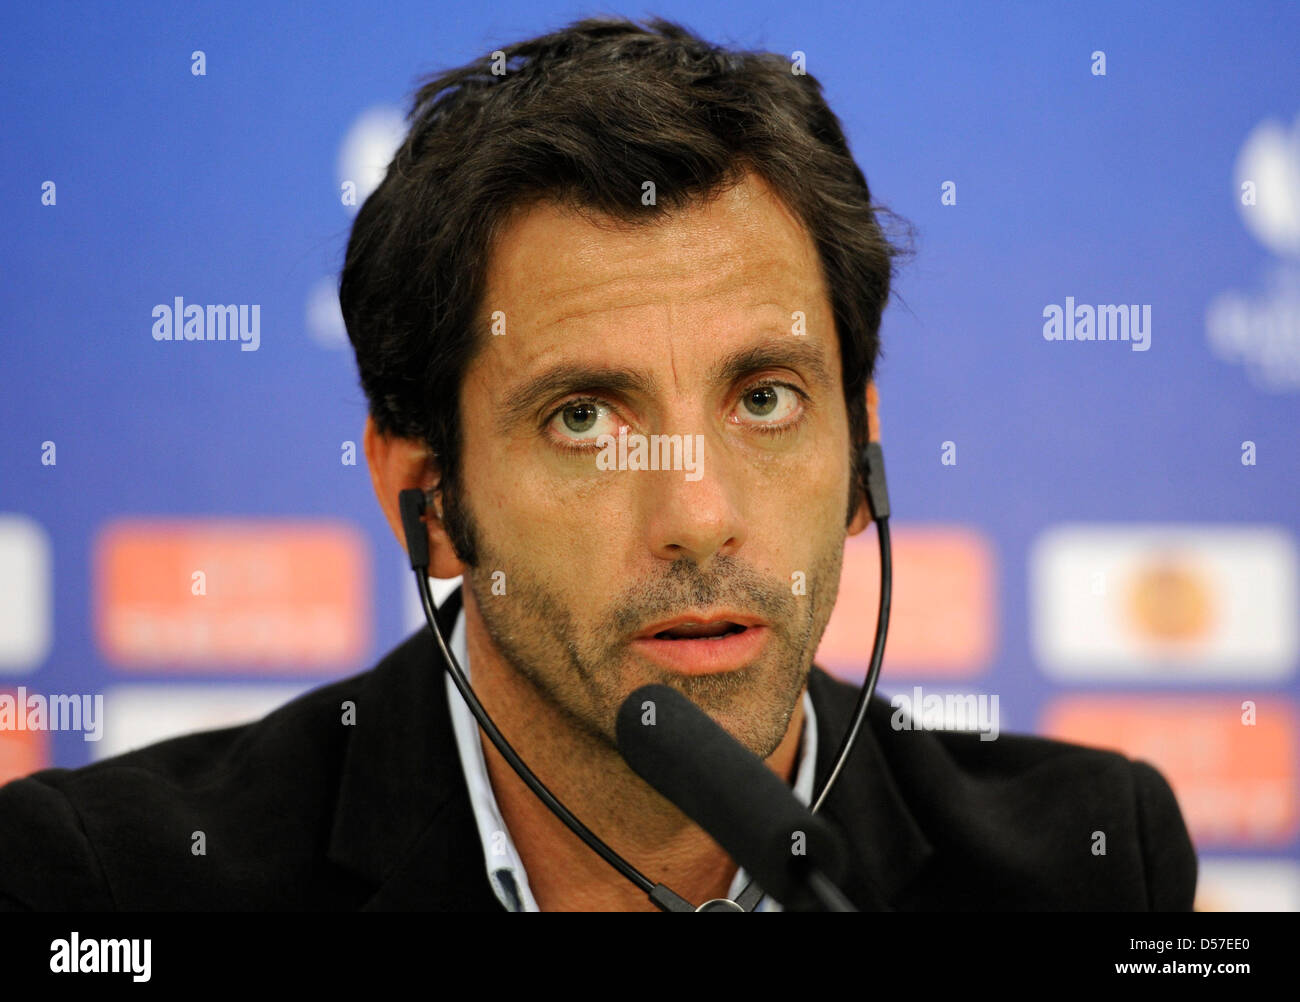 Atletico Madrid's head coach Quique Sanchez Flores answers questions at a press conference in Hamburg, Germany, 11 May 2010. Spanish side Atletico Madrid will face English side FC Fulham in the UEFA Europa League final in Hamburg on 12 May 2010. Photo: Fabian Bimmer Stock Photo